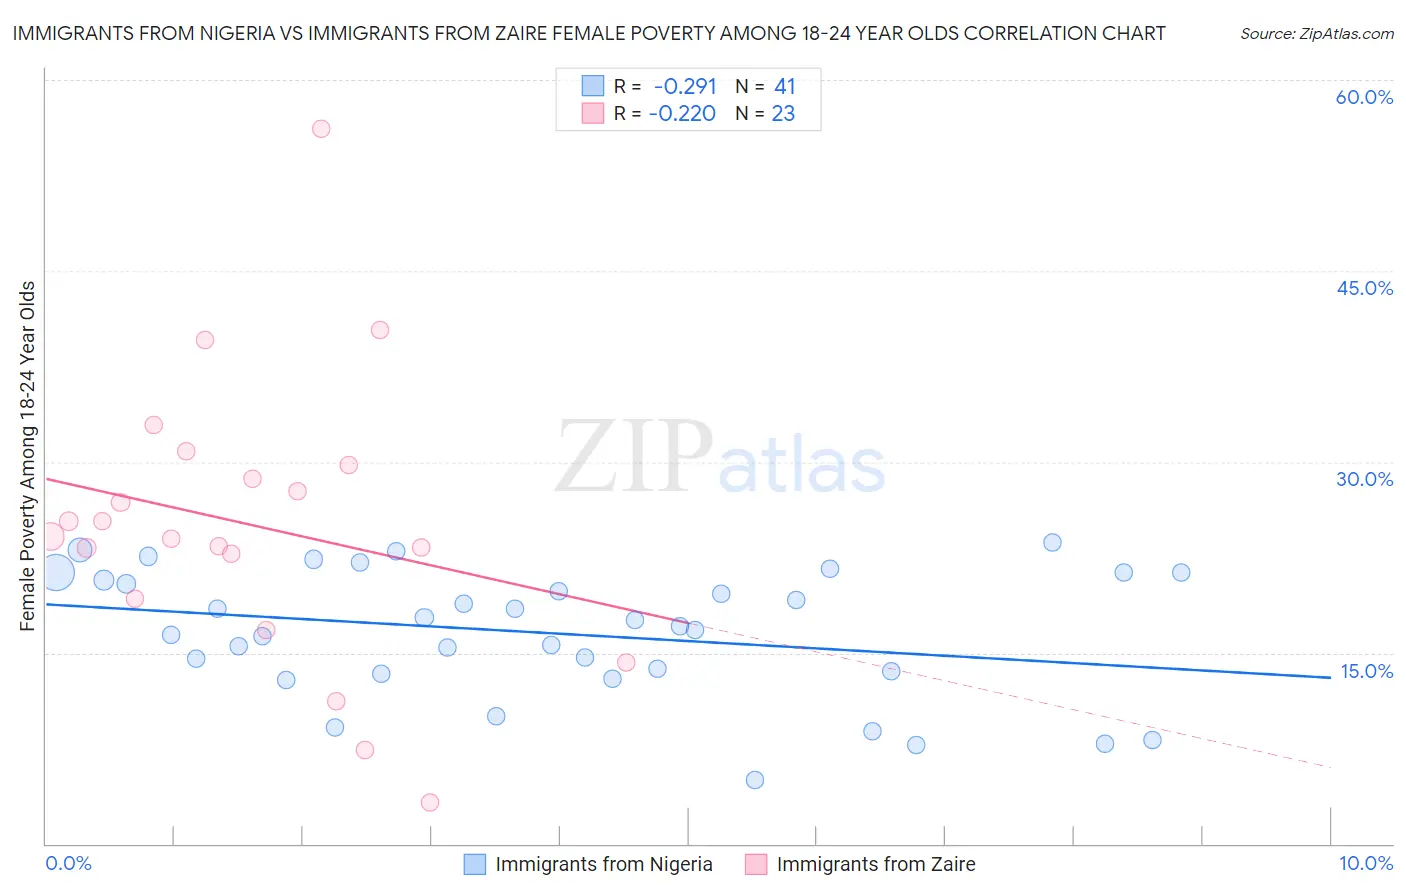 Immigrants from Nigeria vs Immigrants from Zaire Female Poverty Among 18-24 Year Olds